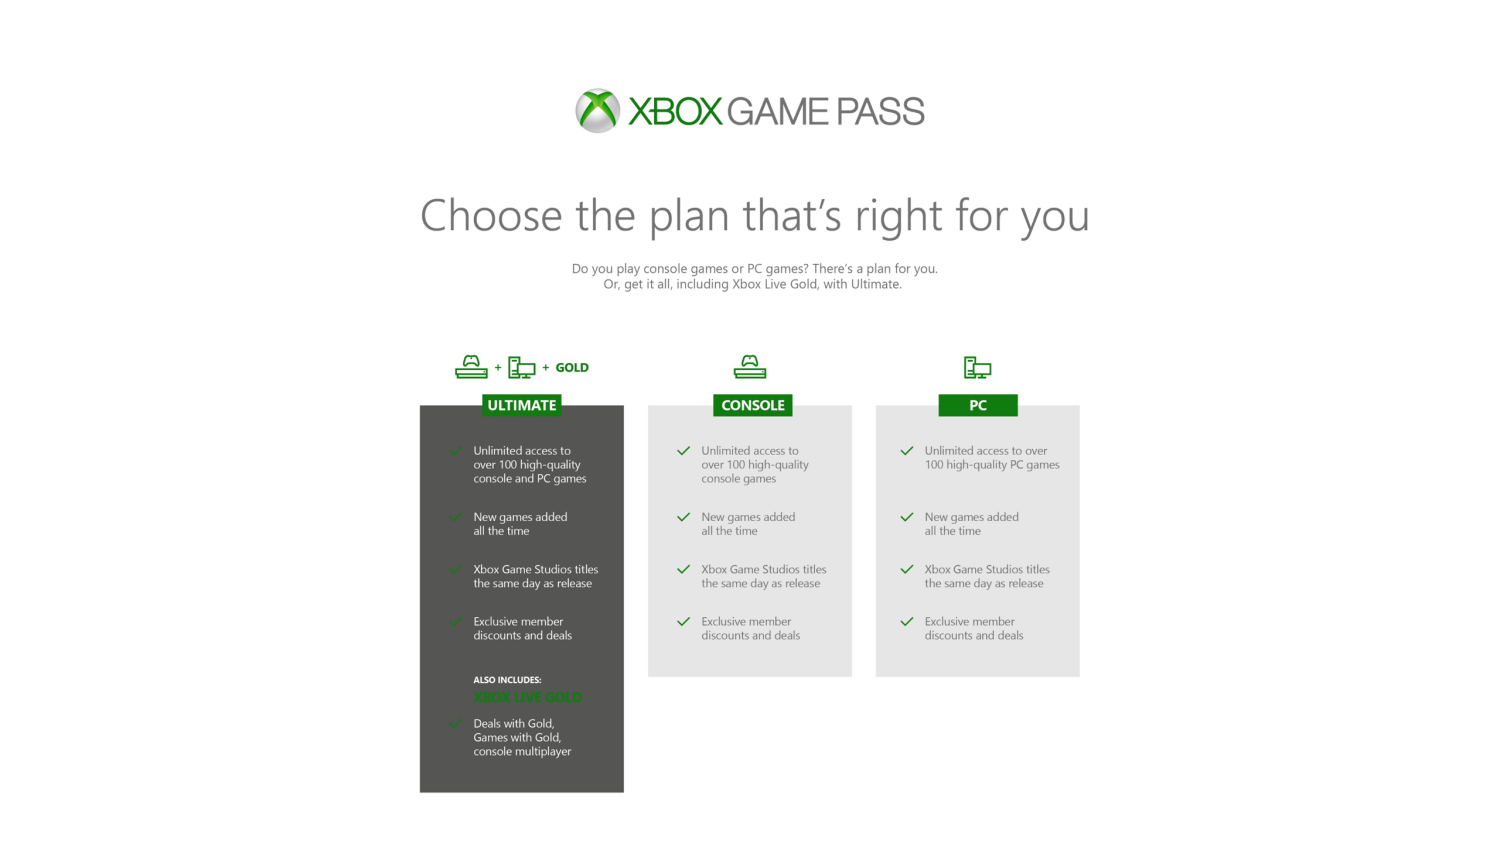 planning to buy gamepass, what gamepass should i buy for better